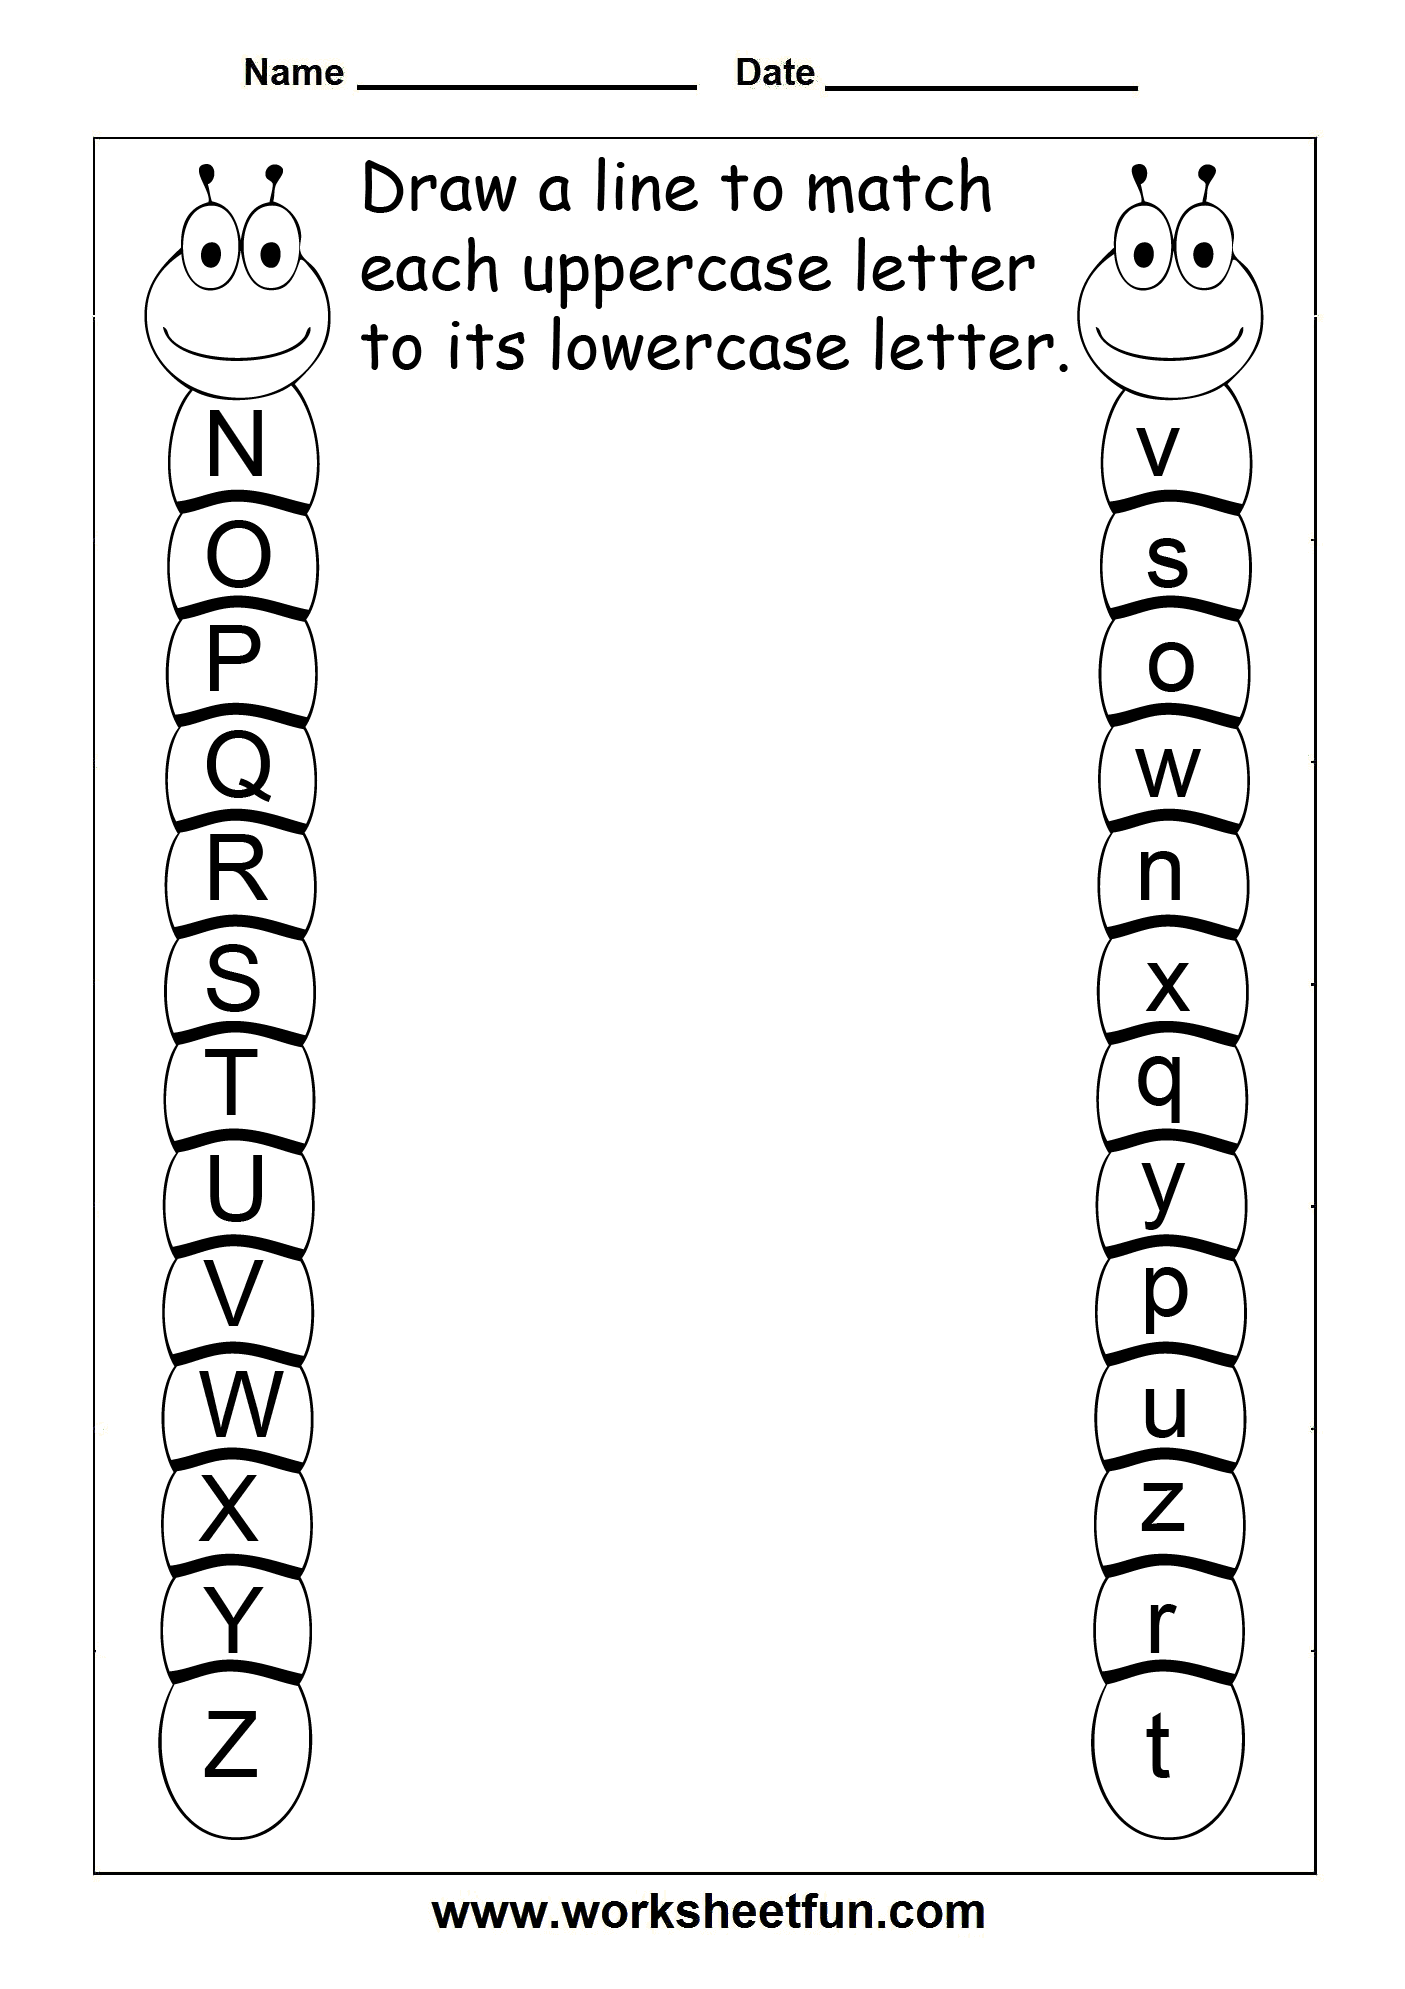 Match Uppercase And Lowercase Letters – 11 Worksheets / FREE Printable